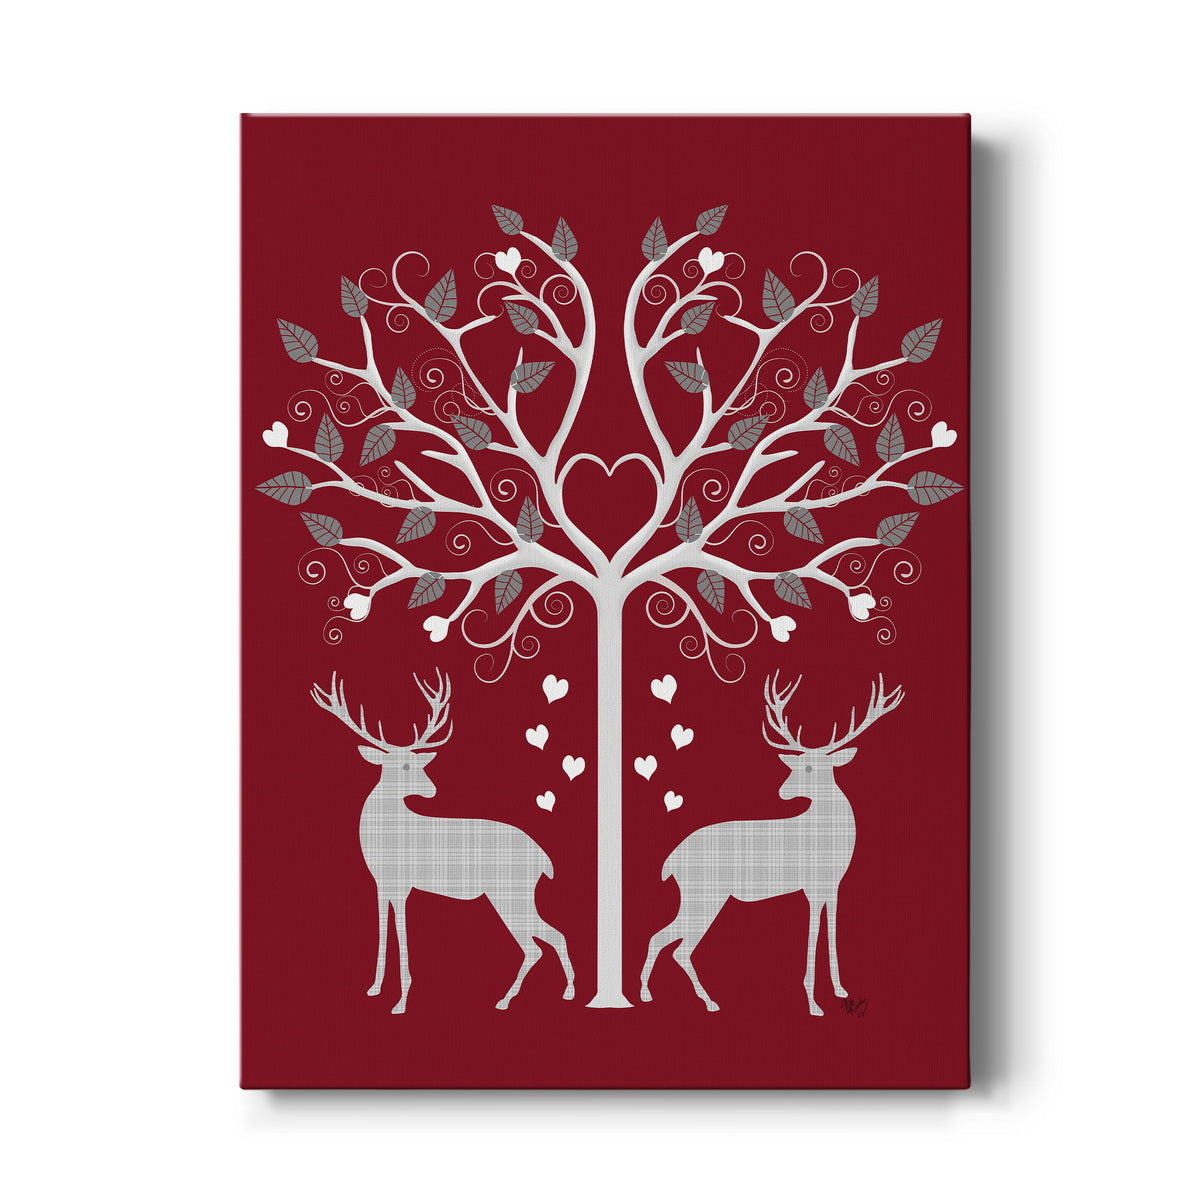 Christmas Des - Deer and Heart Tree, Grey on Red Premium Gallery Wrapped Canvas - Ready to Hang